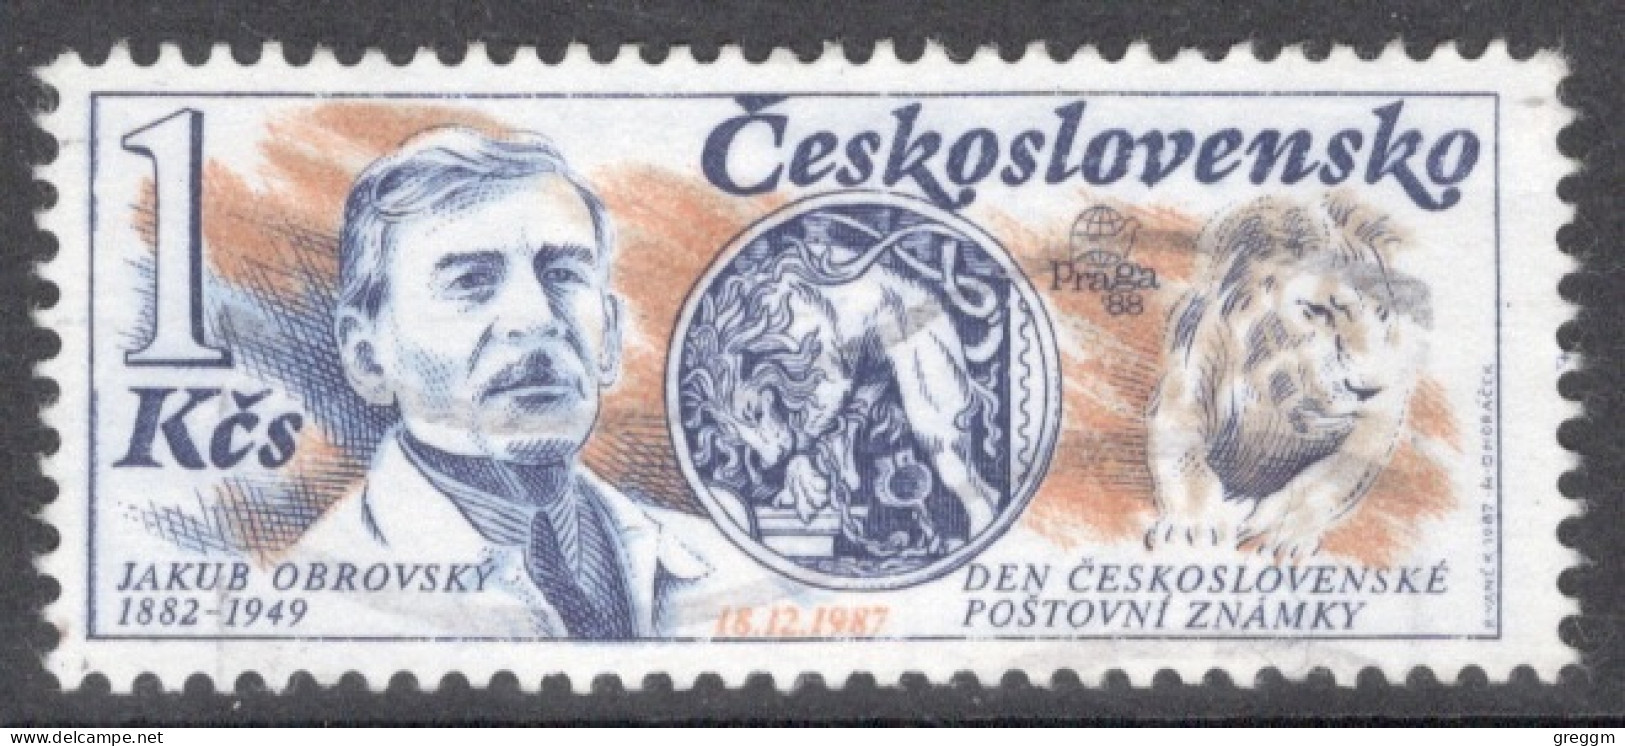 Czechoslovakia 1987 Single Stamp For The 105th Anniversary Of The Birth Of Jakub Obrovsky ,Stamp Designer In Fine Used - Used Stamps